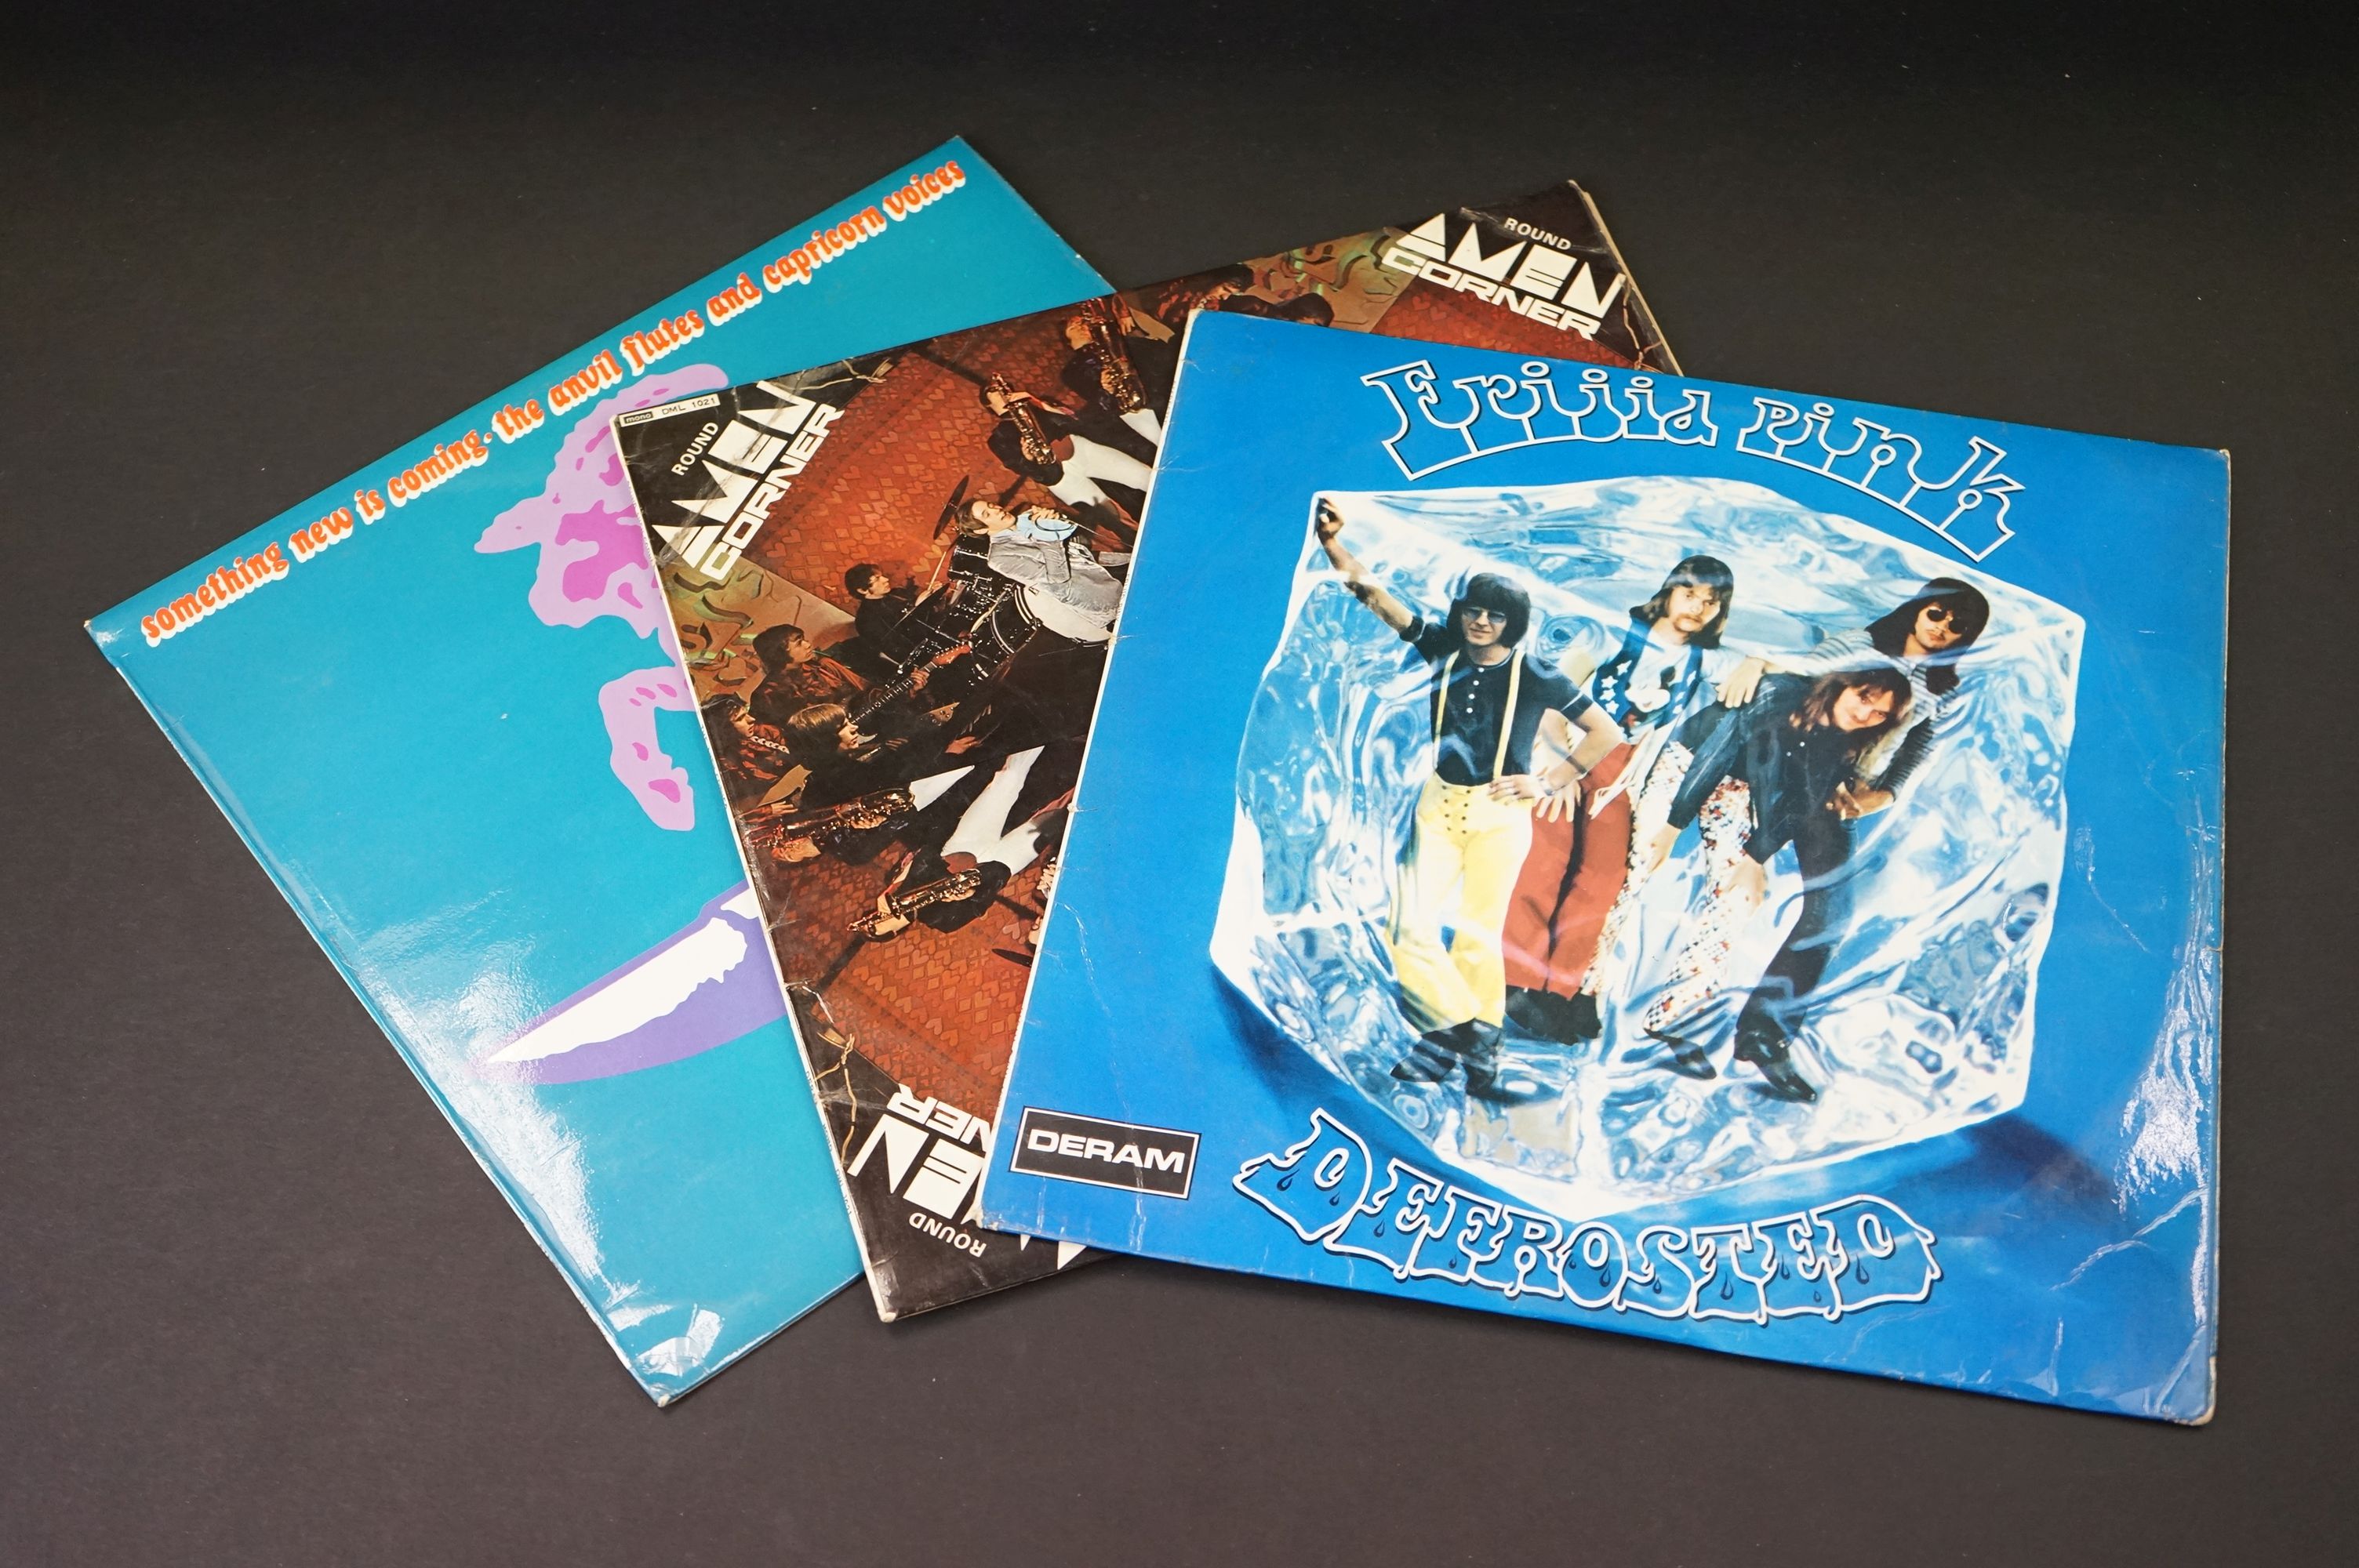 Vinyl - 11 original UK pressing albums on Deram Records to include: The Alan Bown! - The Alan - Image 11 of 12